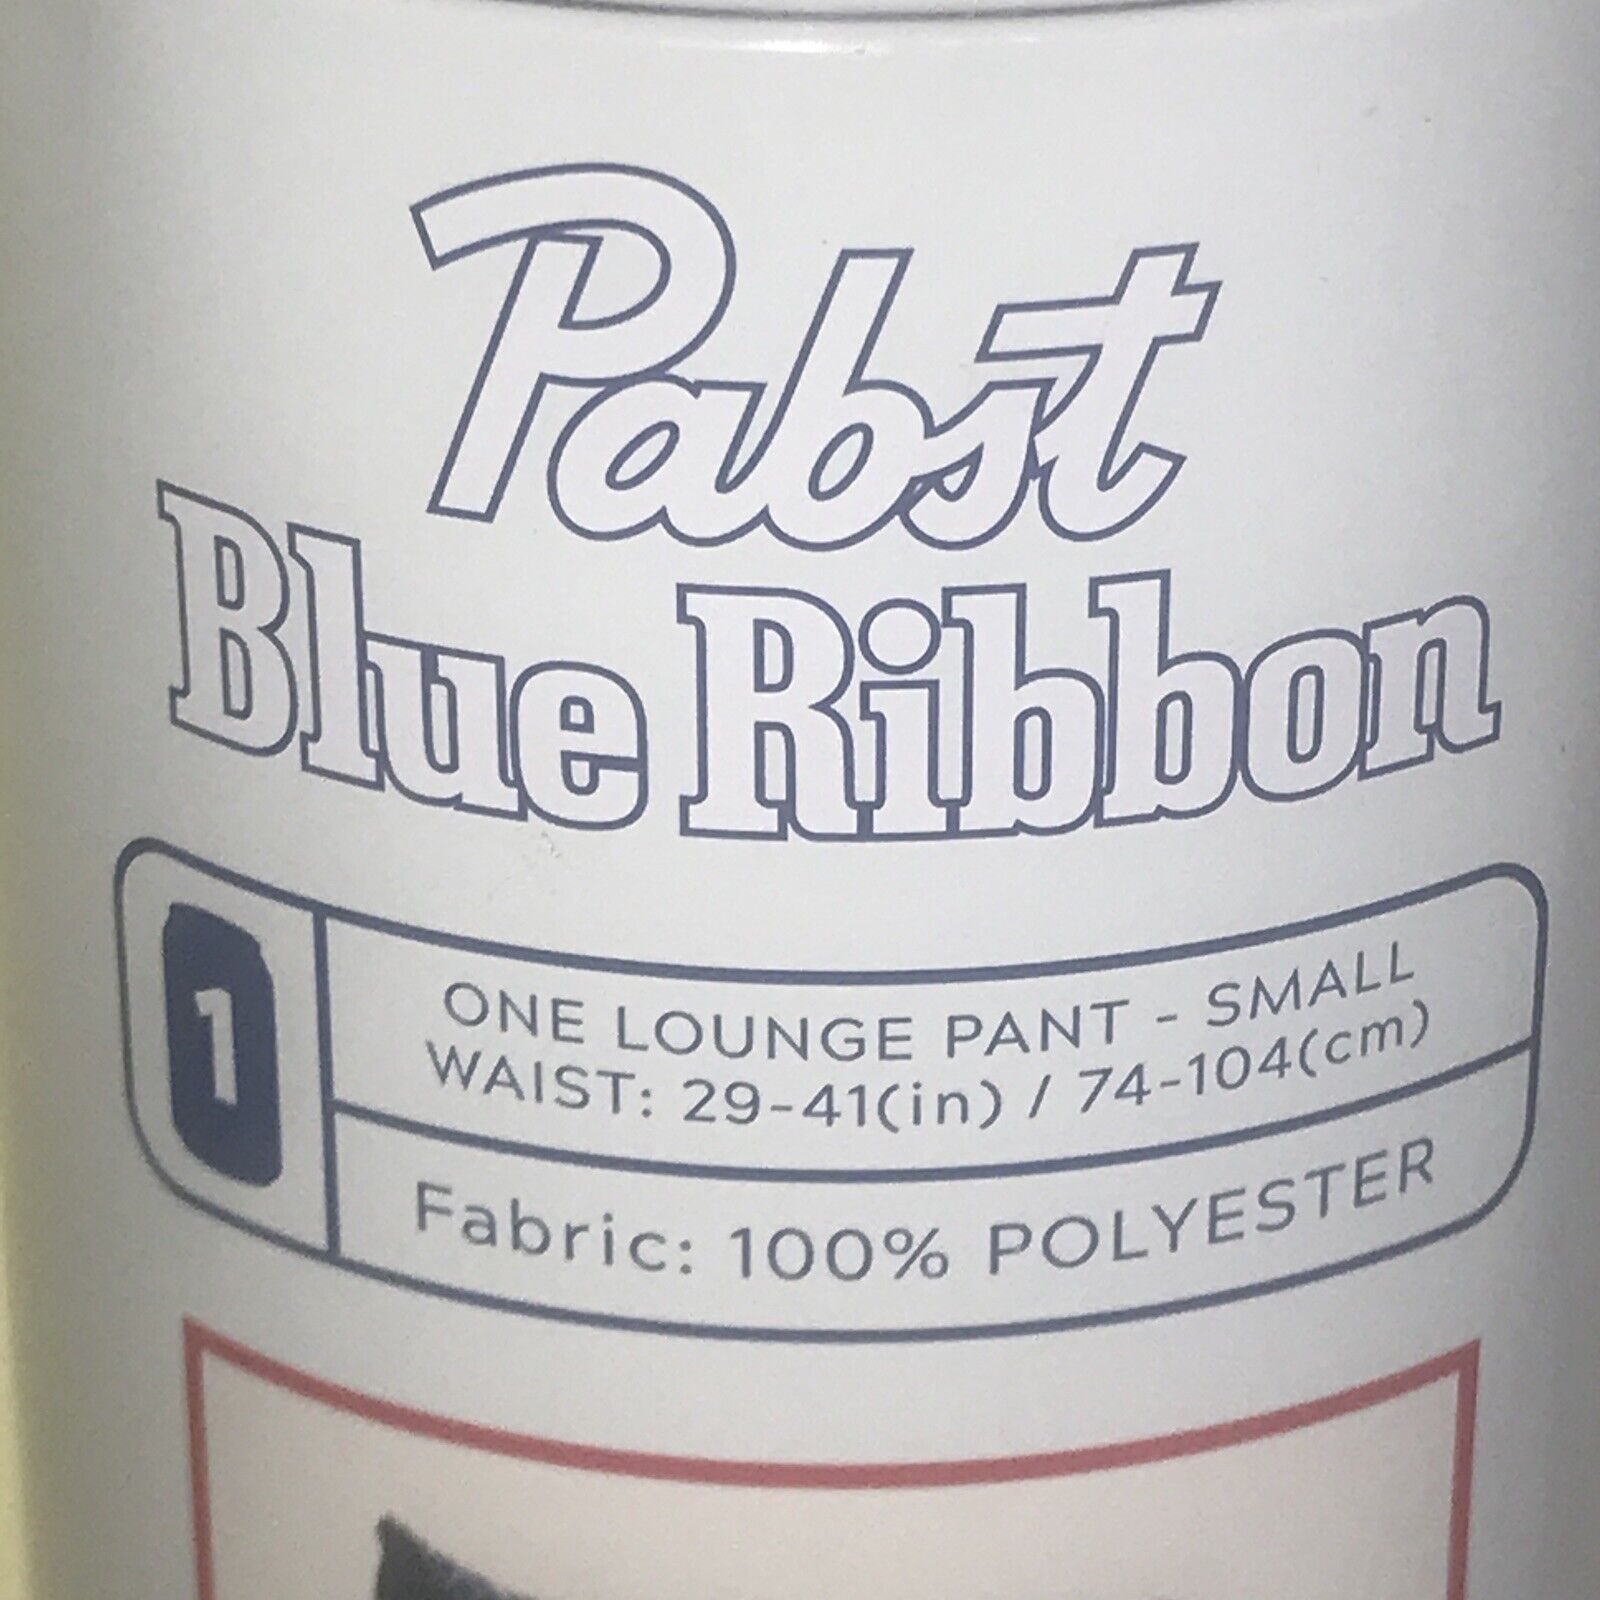 PBR Pabst Blue Ribbon Beer Lounge Pants in a can-SIZE SMALL S Swag Boxers Pabst Blue Ribbon - фотография #3